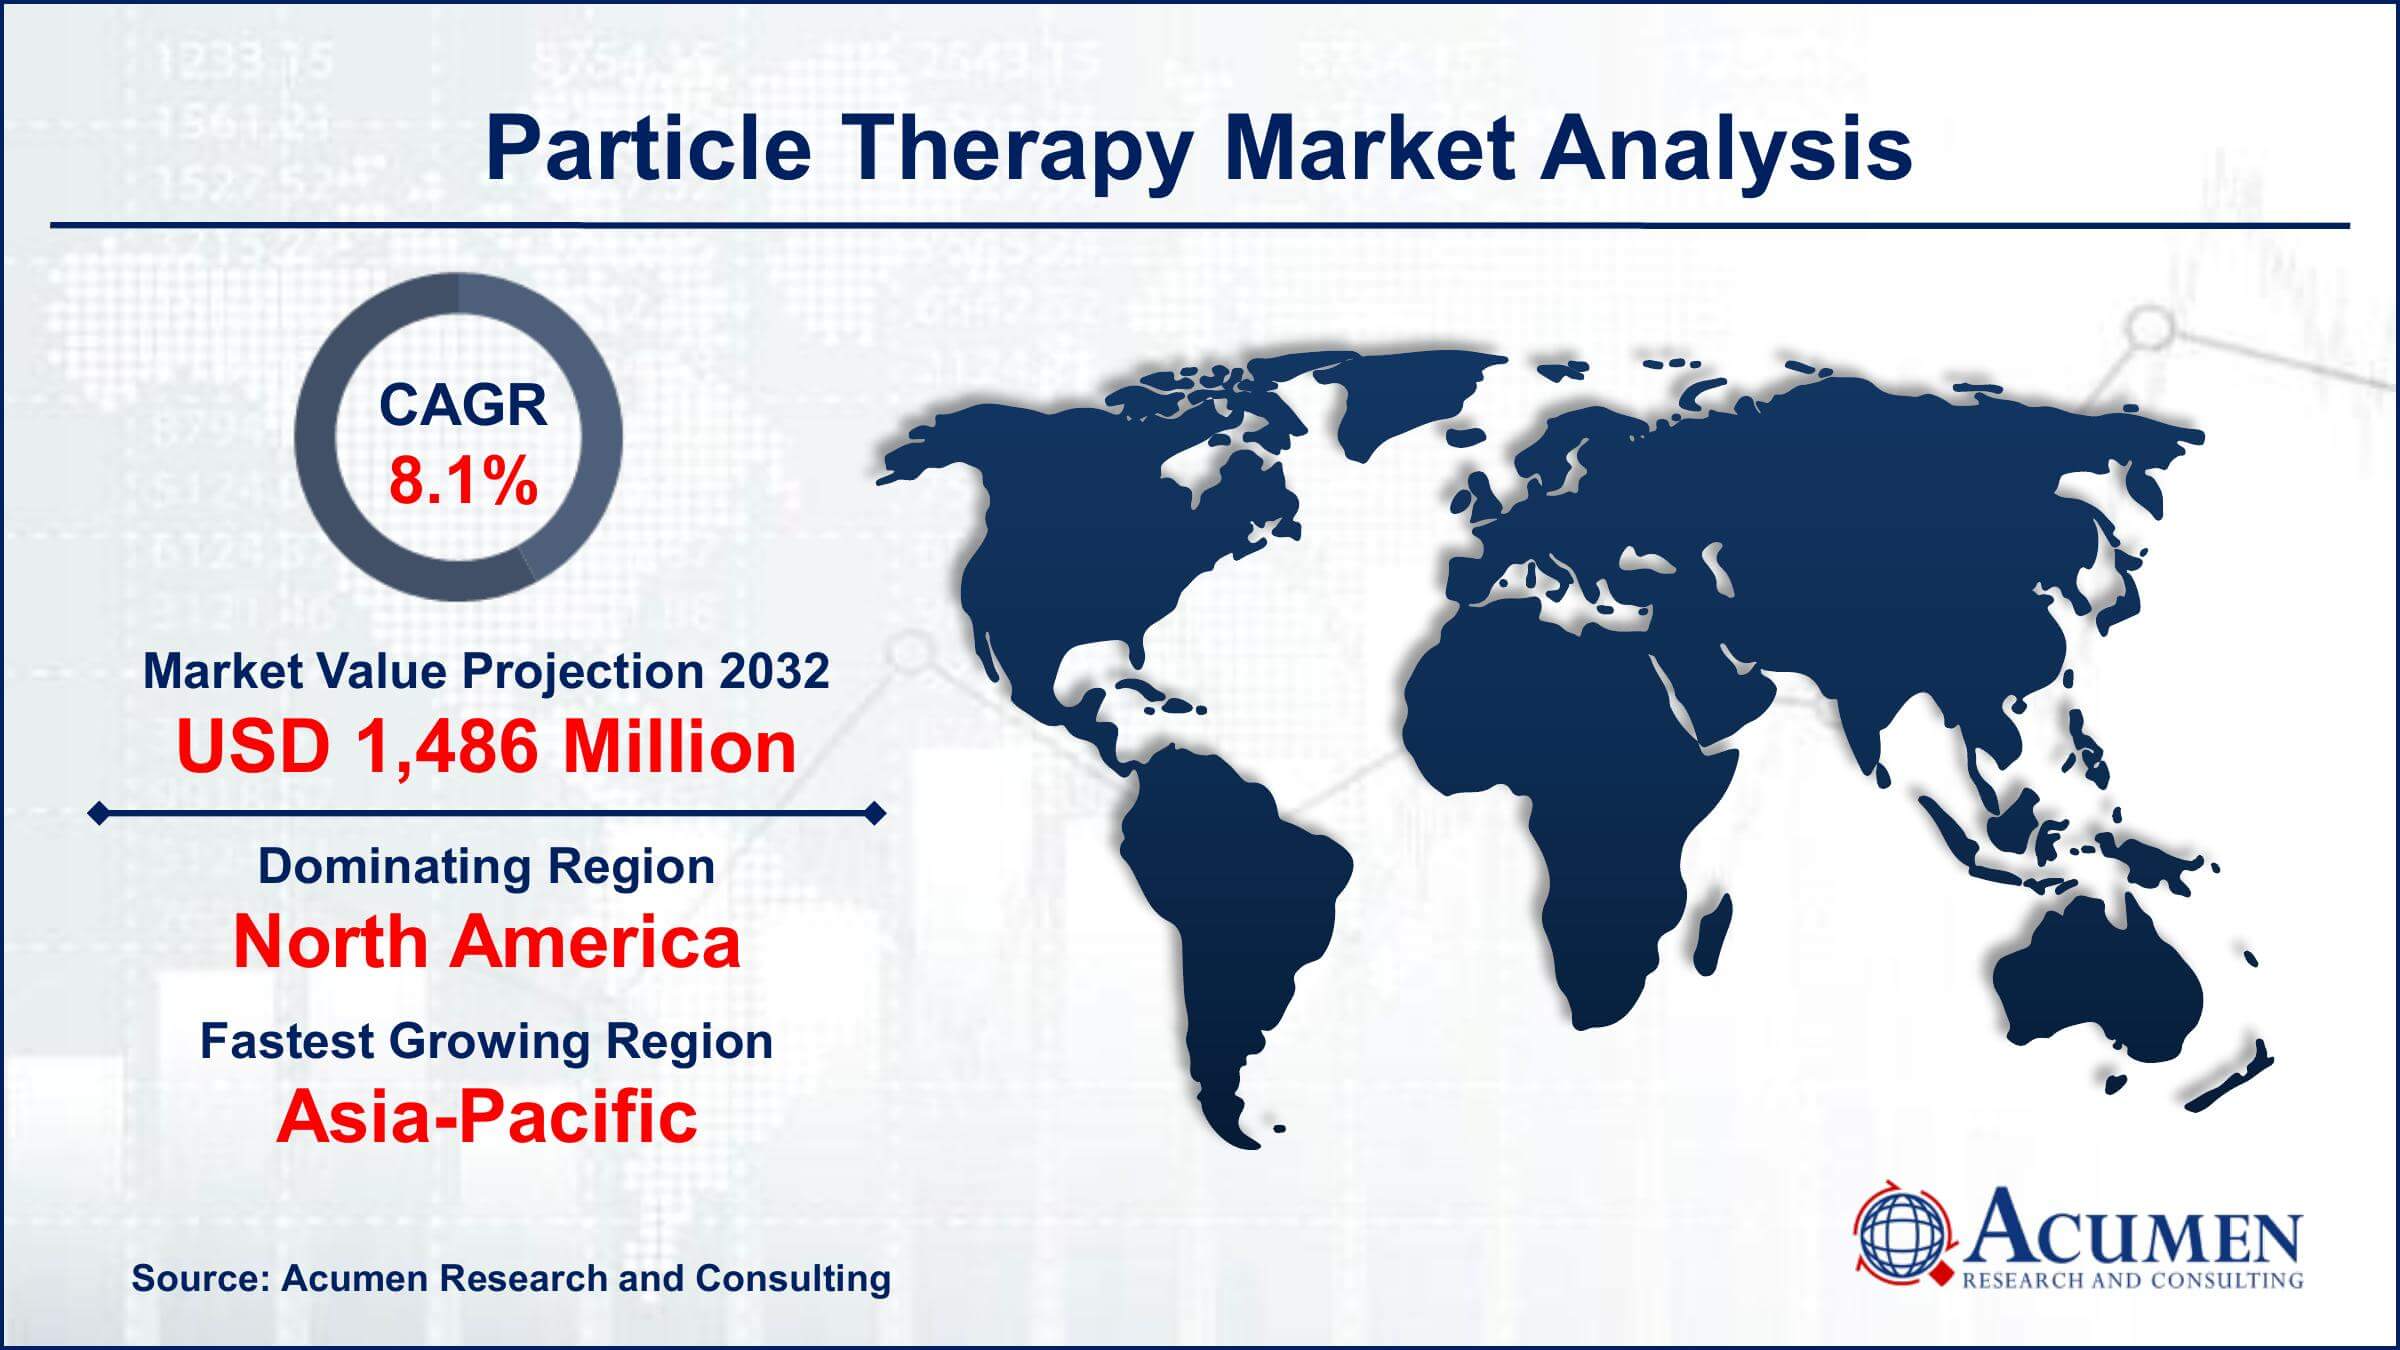 Global Particle Therapy Market Trends